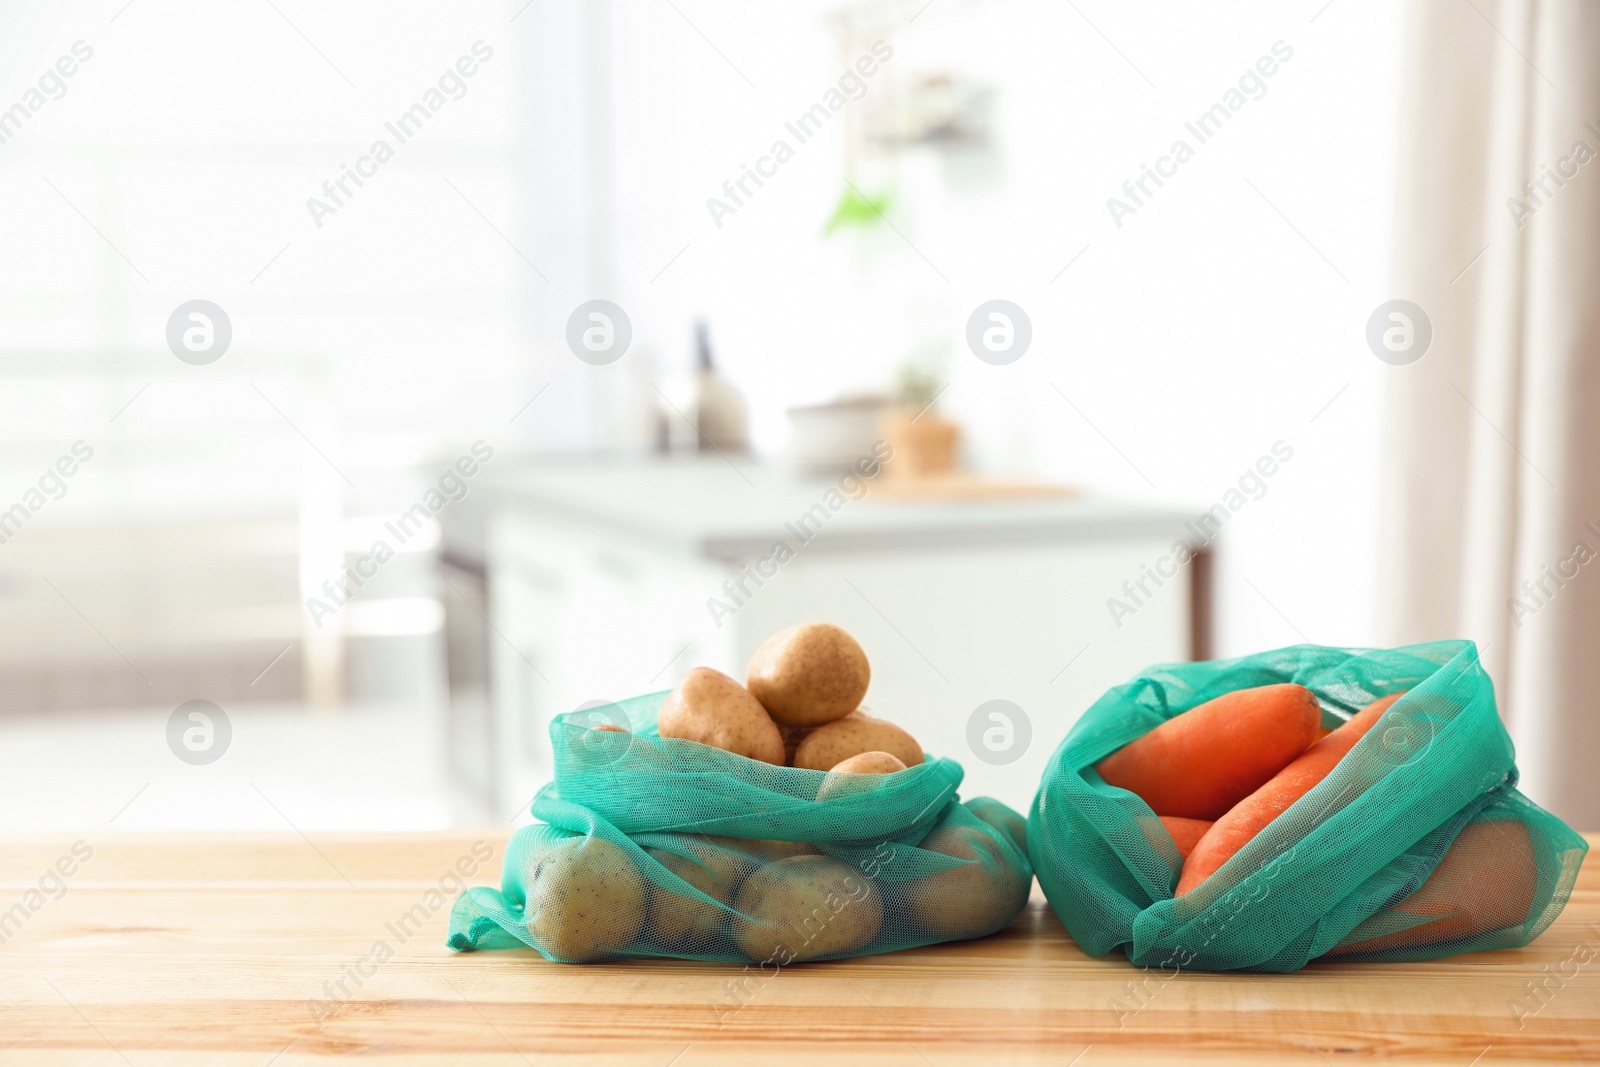 Photo of Net bags with vegetables on wooden table in kitchen